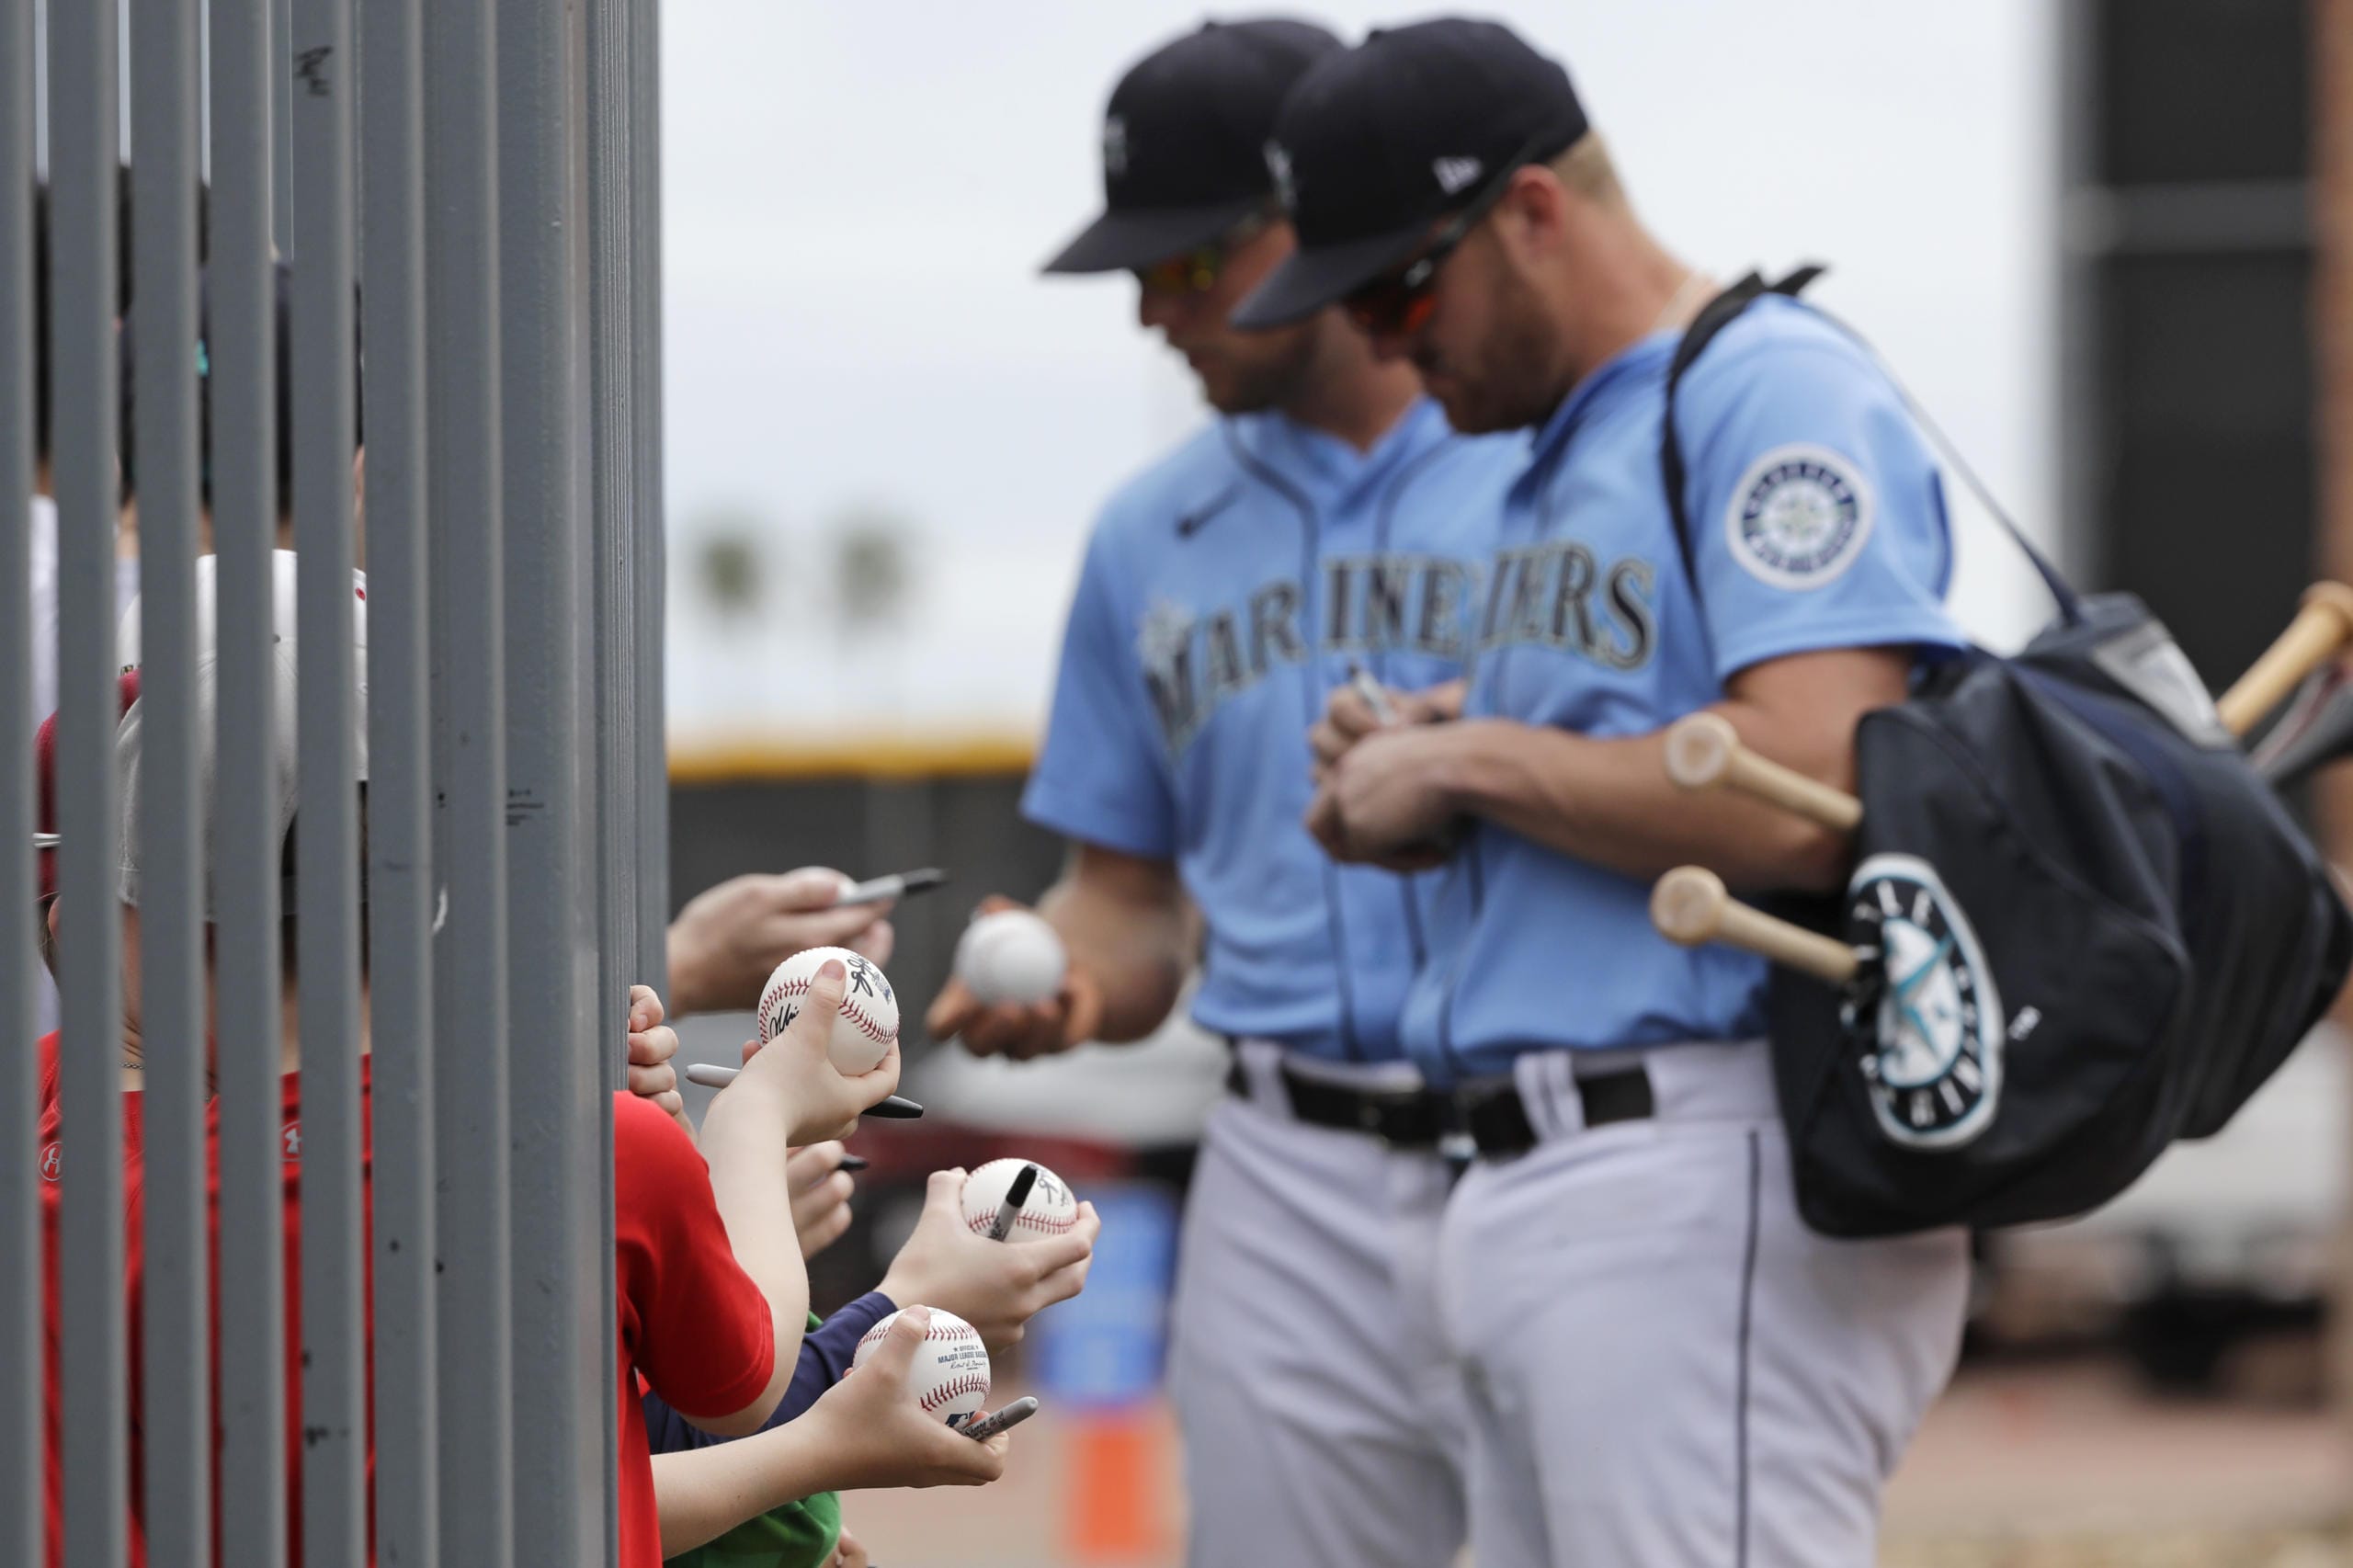 Seattle Mariners' Connor Lien, left, and Mitch Nay stop to sign autographs before a spring training baseball game against the Los Angeles Angels on Tuesday, March 10, 2020, in Peoria, Ariz.